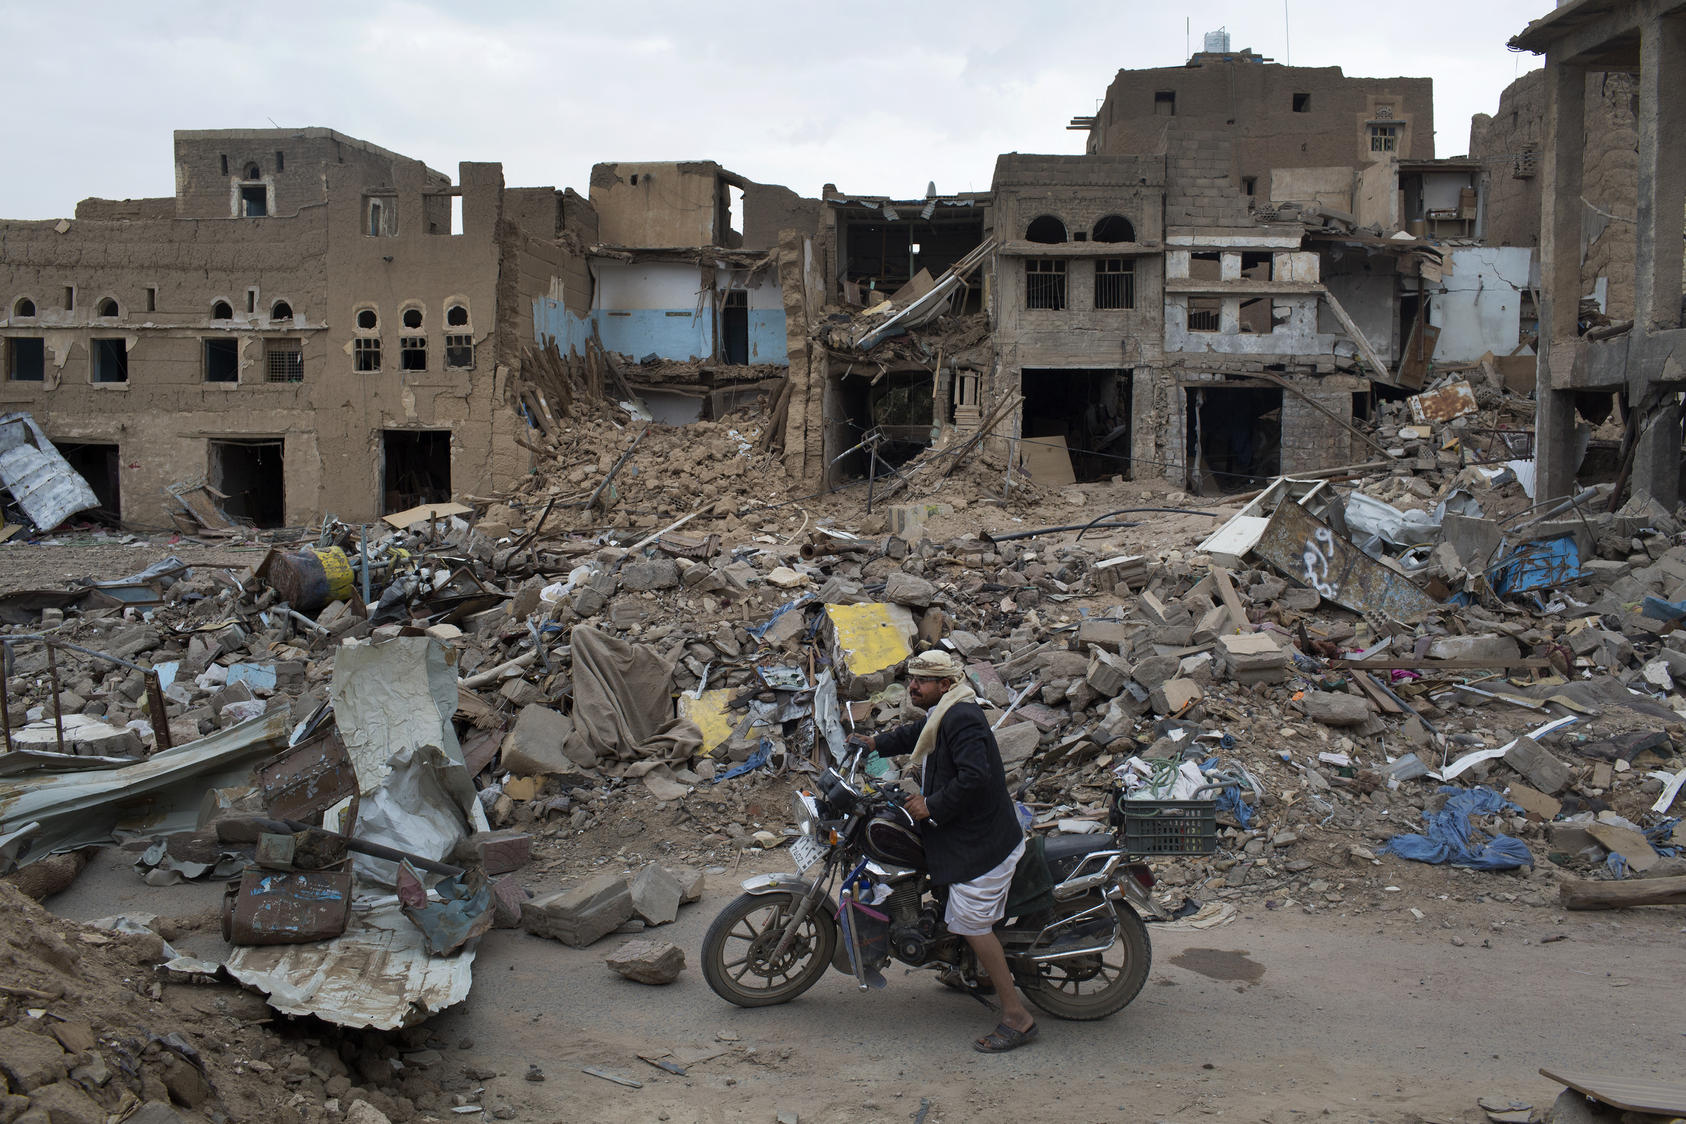 The northern city of Saada, a stronghold of the Houthi rebel militia, damaged from intense bombardment by the Saudi led military coalition, in Yemen, Sept. 7, 2015. While some high-level terrorists remain at Guantanamo Bay, there are also many low-level detainees who remain only because they are from Yemen, which is in turmoil. (Tyler Hicks/The New York Times)